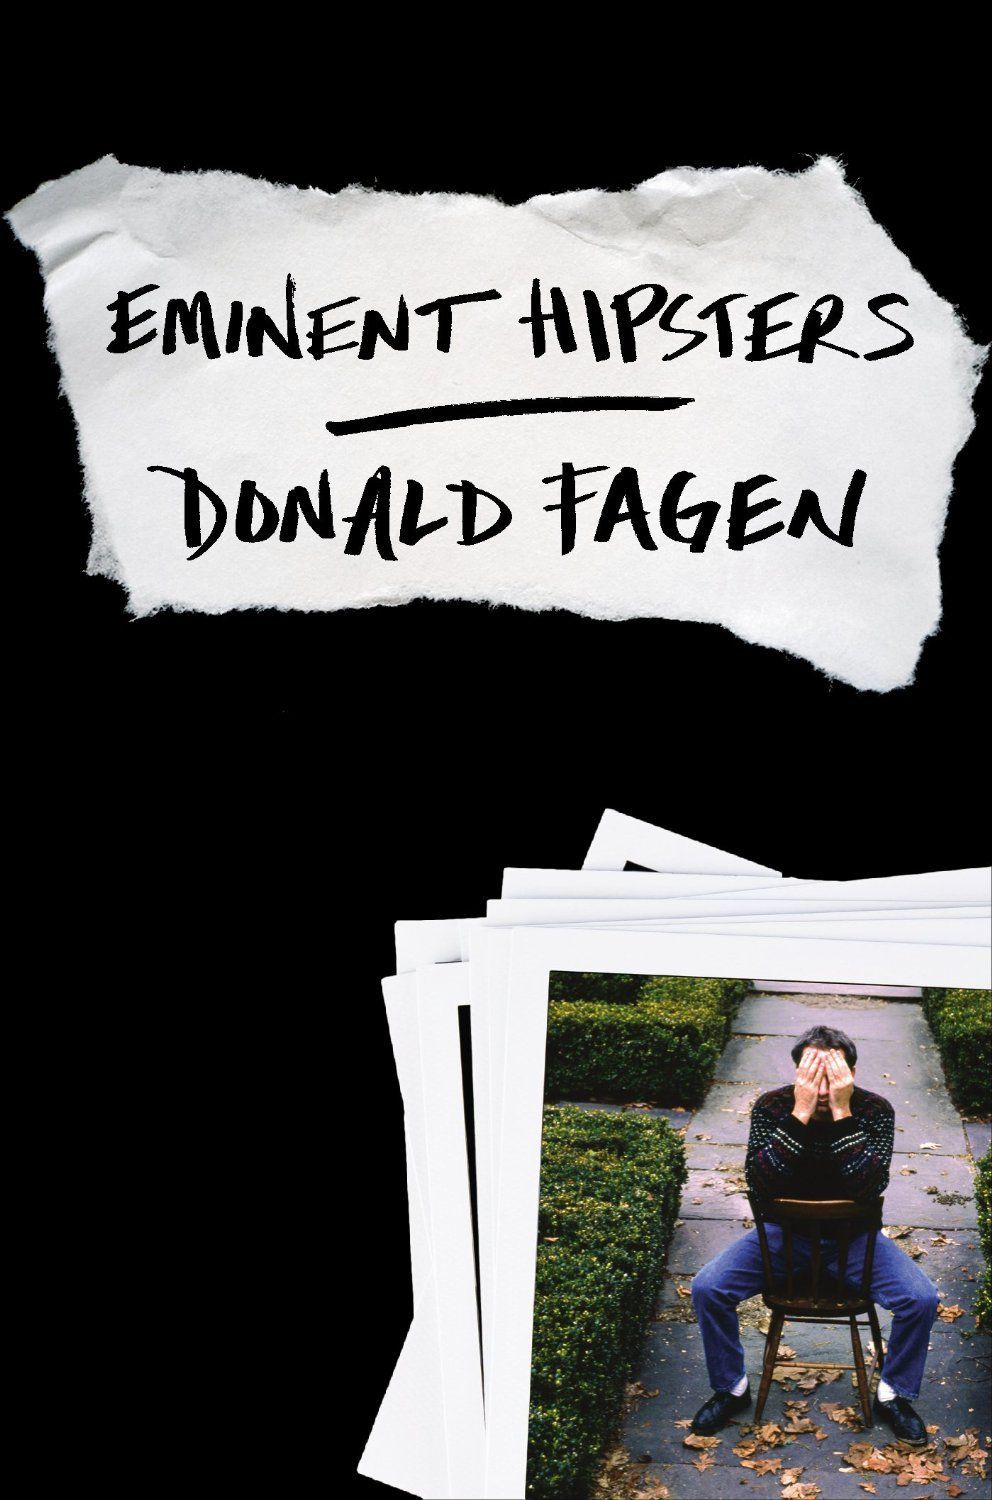 The Donald Fagen Papers